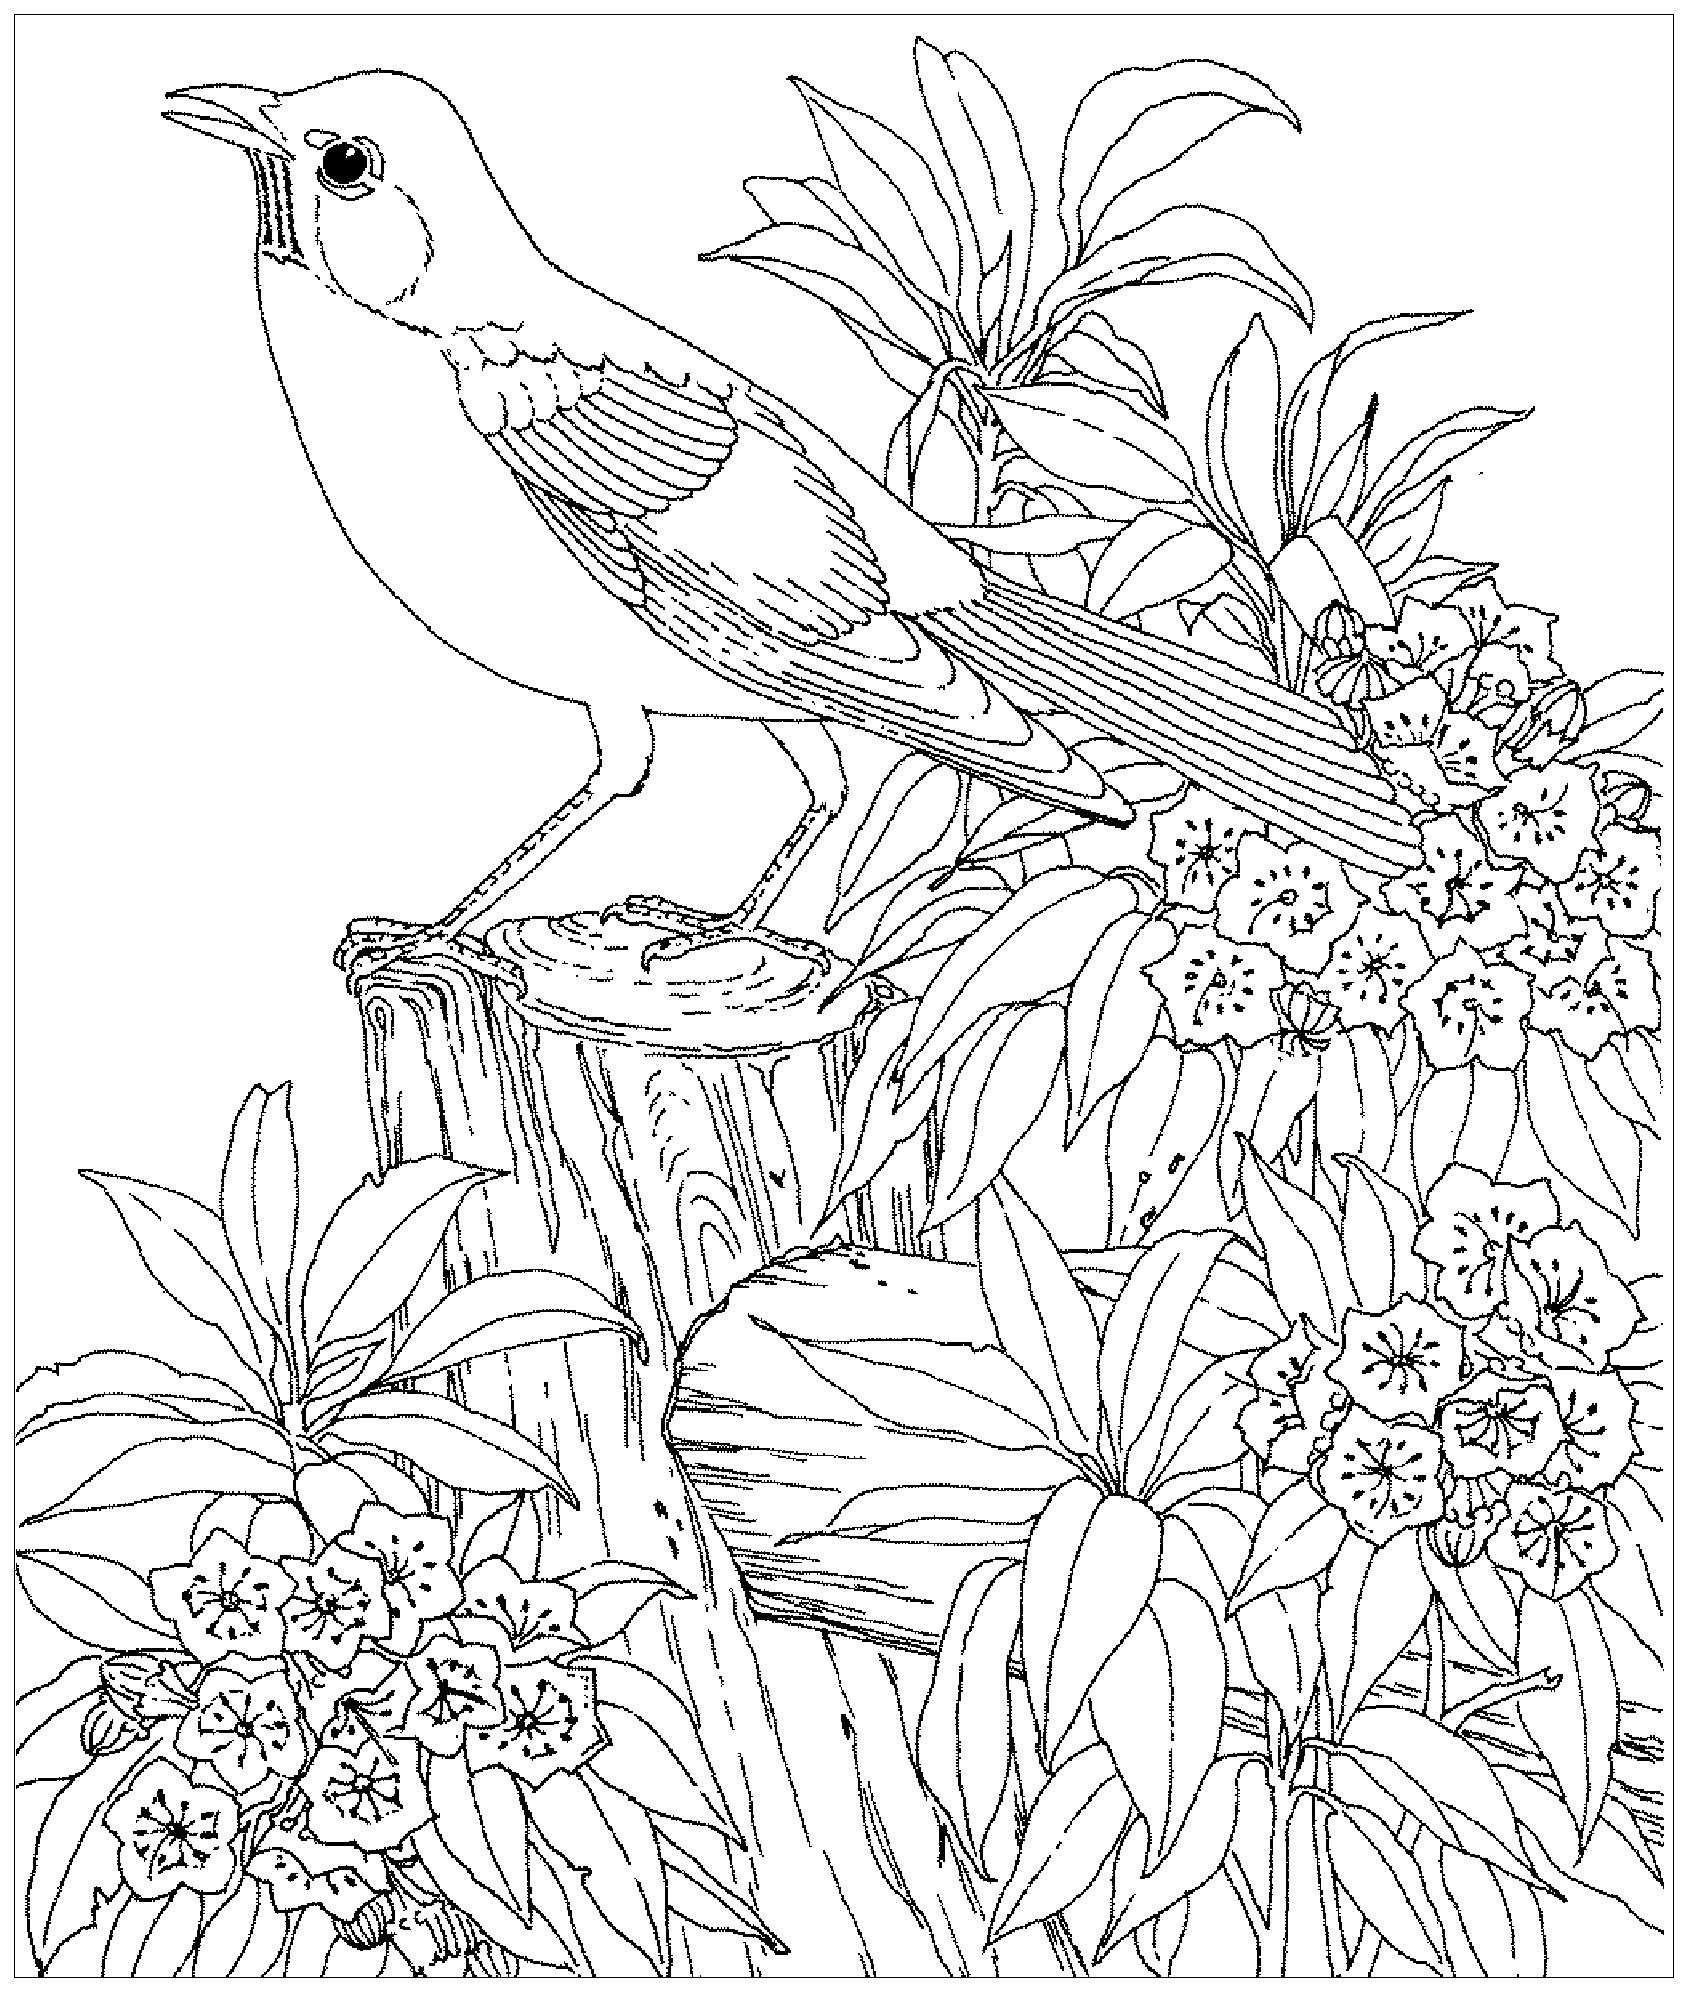 NZ Native Bird Outline Colouring Pages Pack (teacher made)